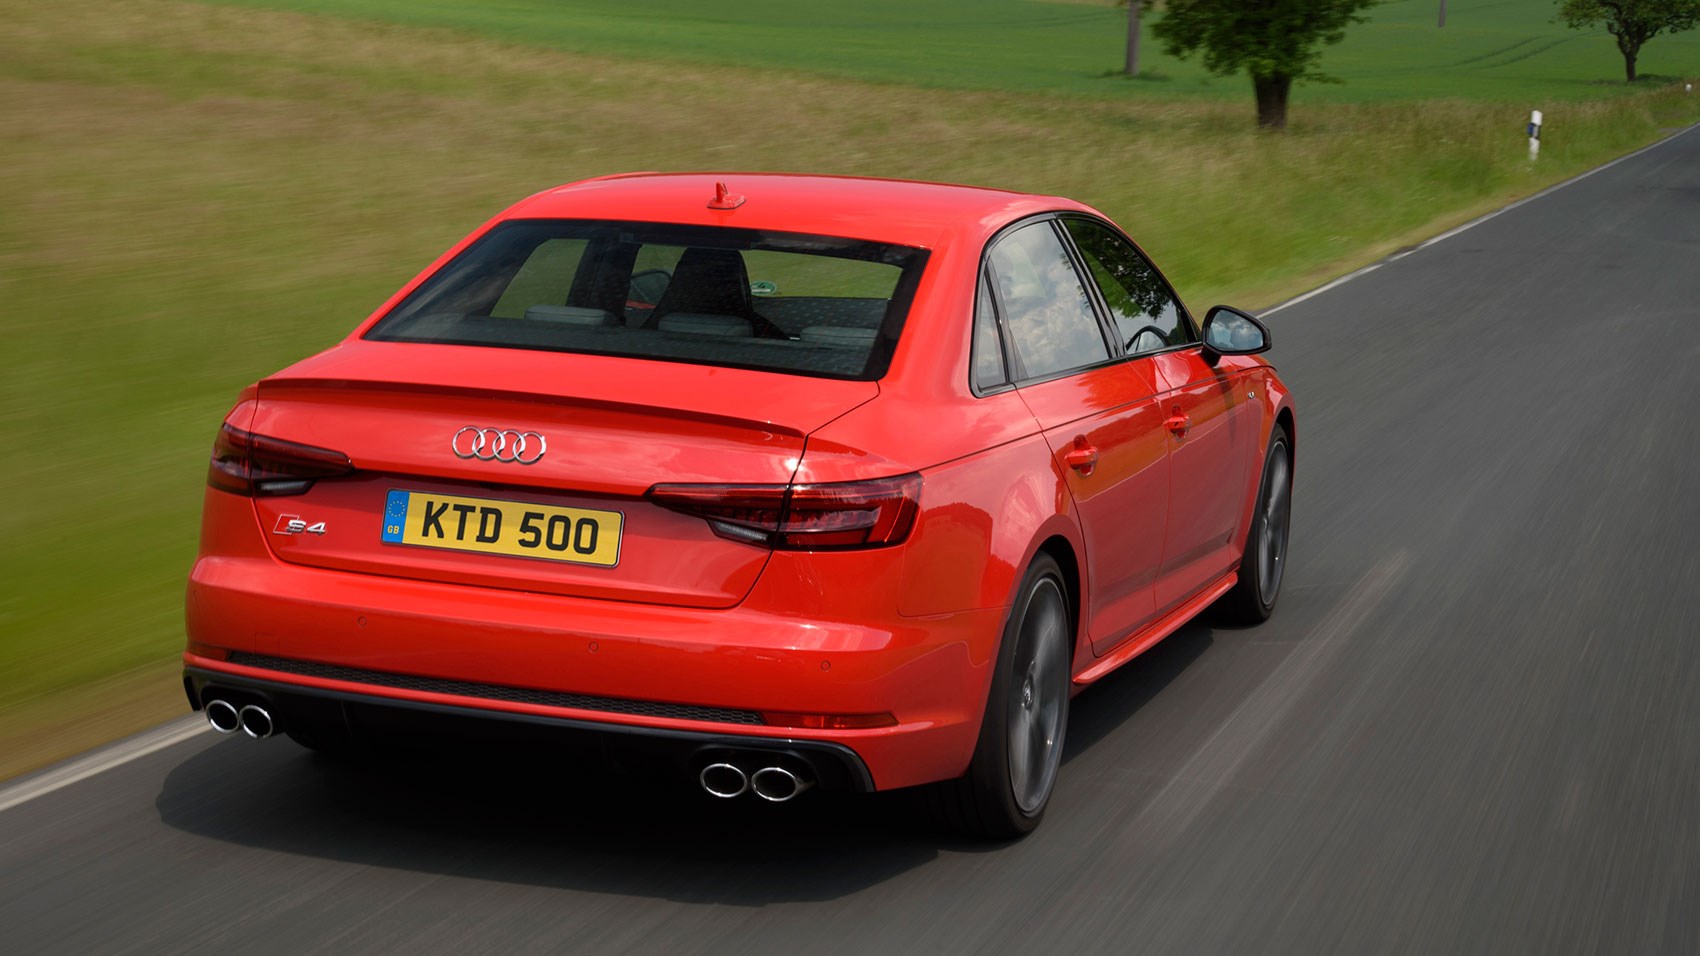 New Audi S4 saloon: the CAR magazine review